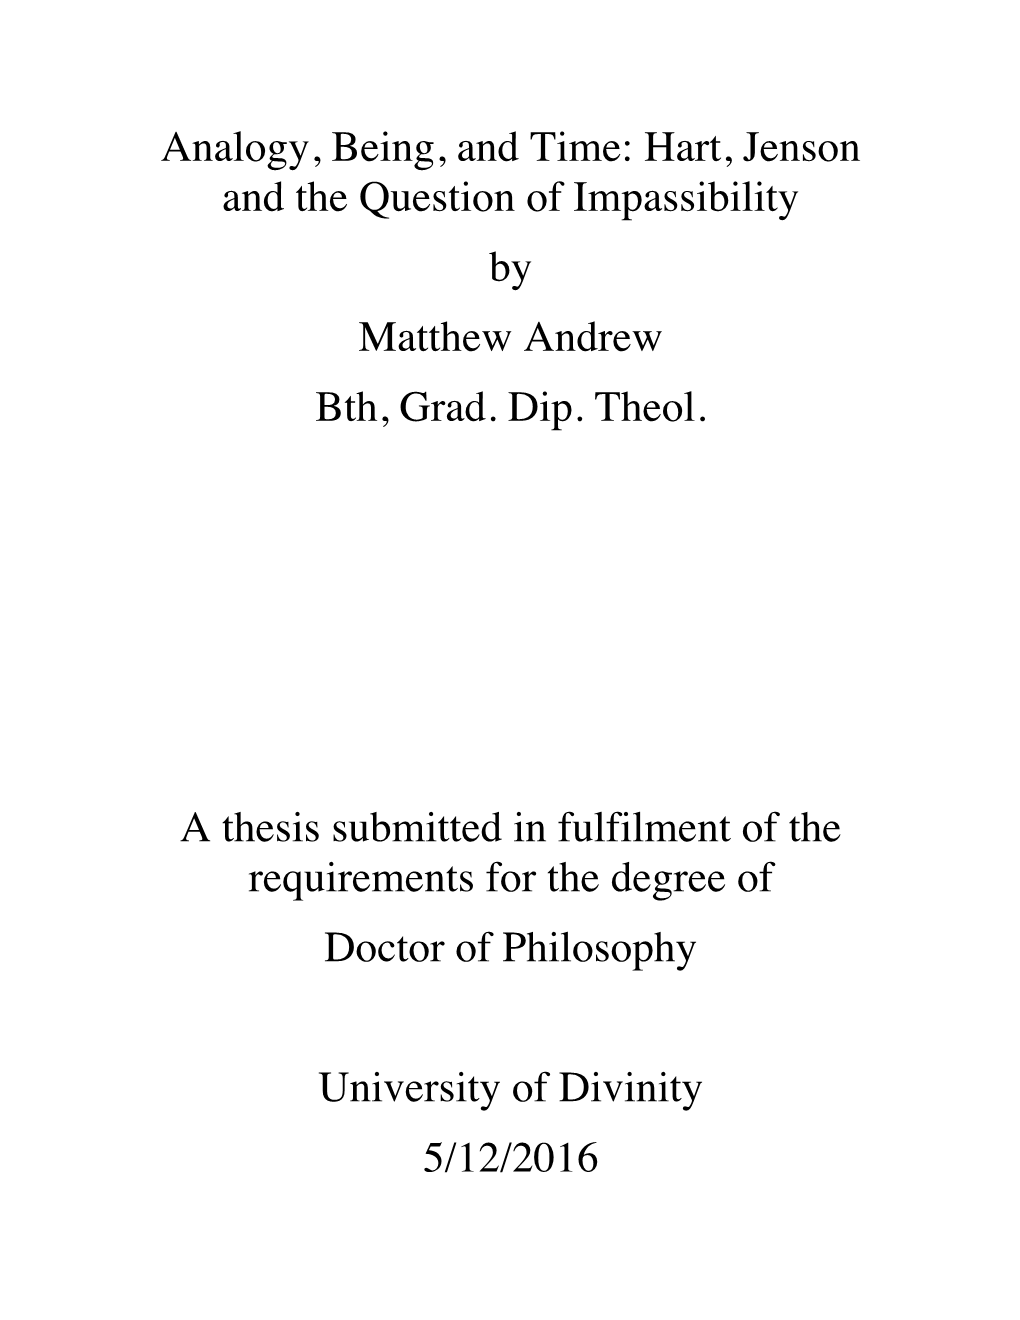 Analogy, Being, and Time: Hart, Jenson and the Question of Impassibility by Matthew Andrew Bth, Grad